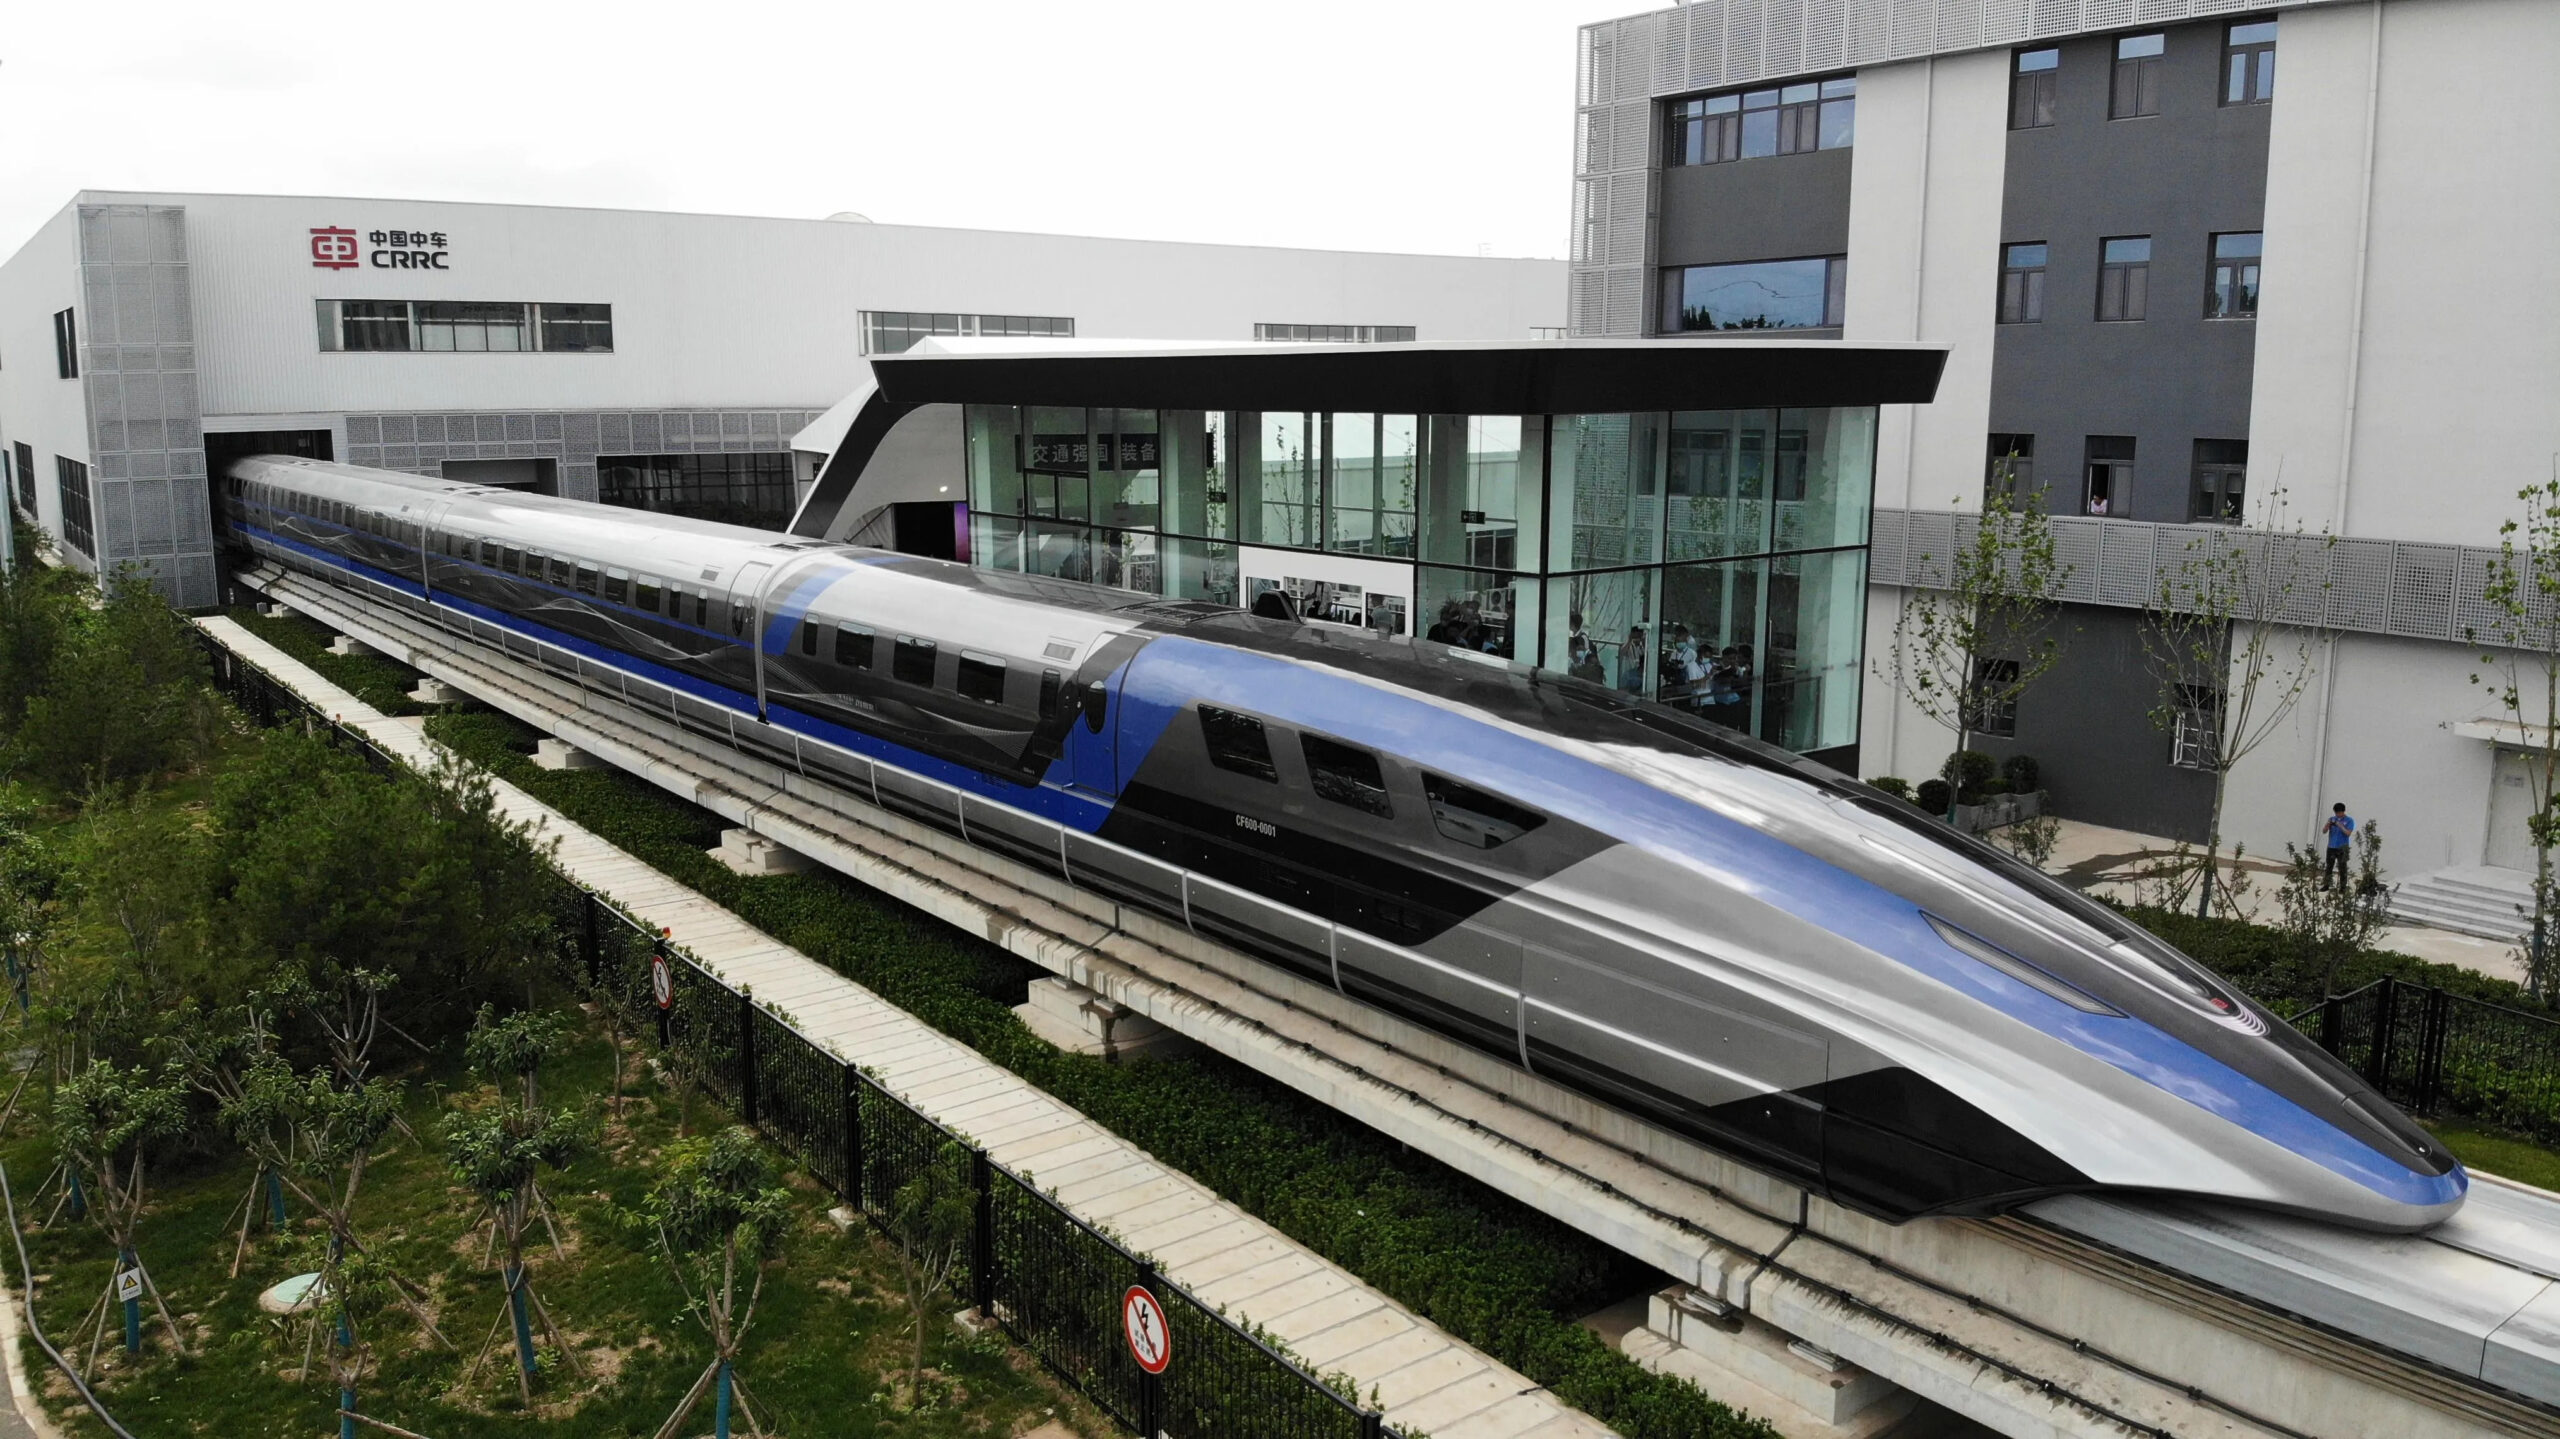 An EMS maglev prototype operating at 600 km/h. Presentation at CRRC's Qingdao plant